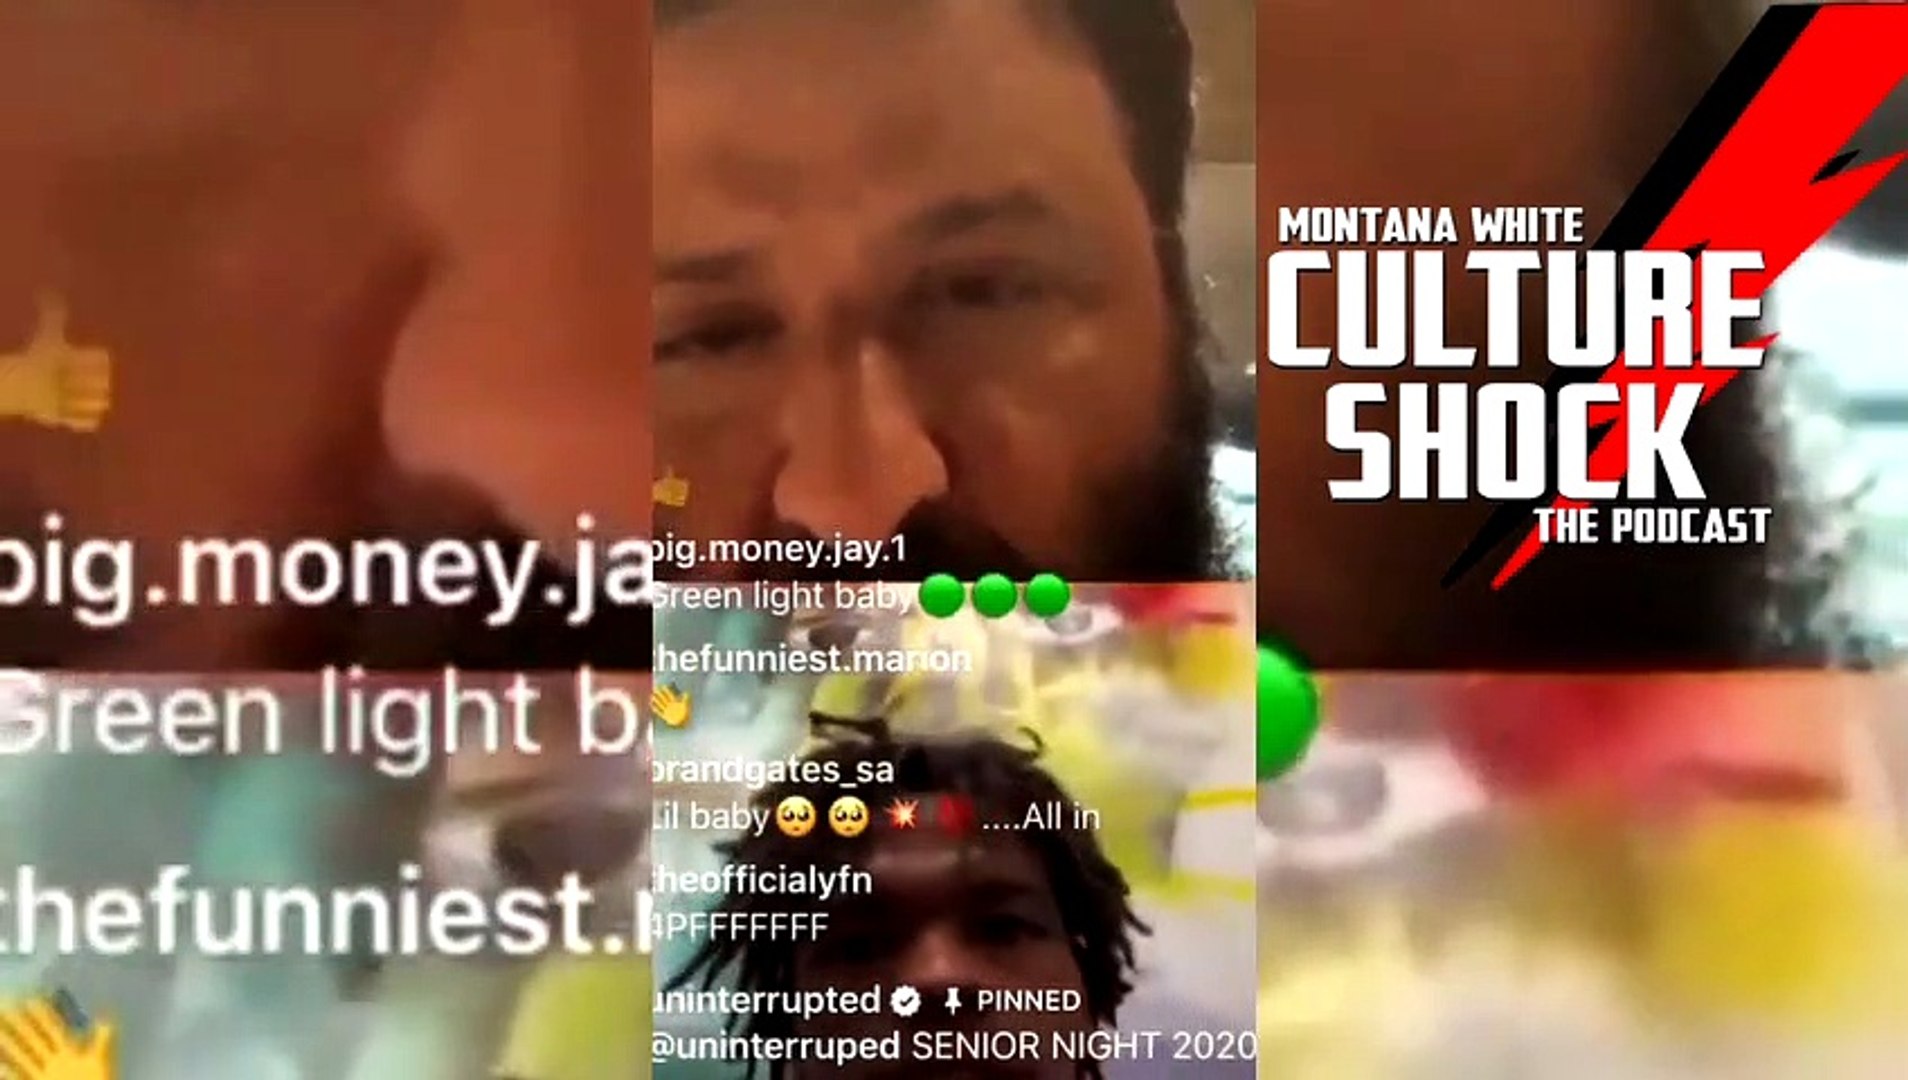 ⁣LIL BABY & DJ KHALED discuss EFFECTS of CORONA VIRUS on YOUTH